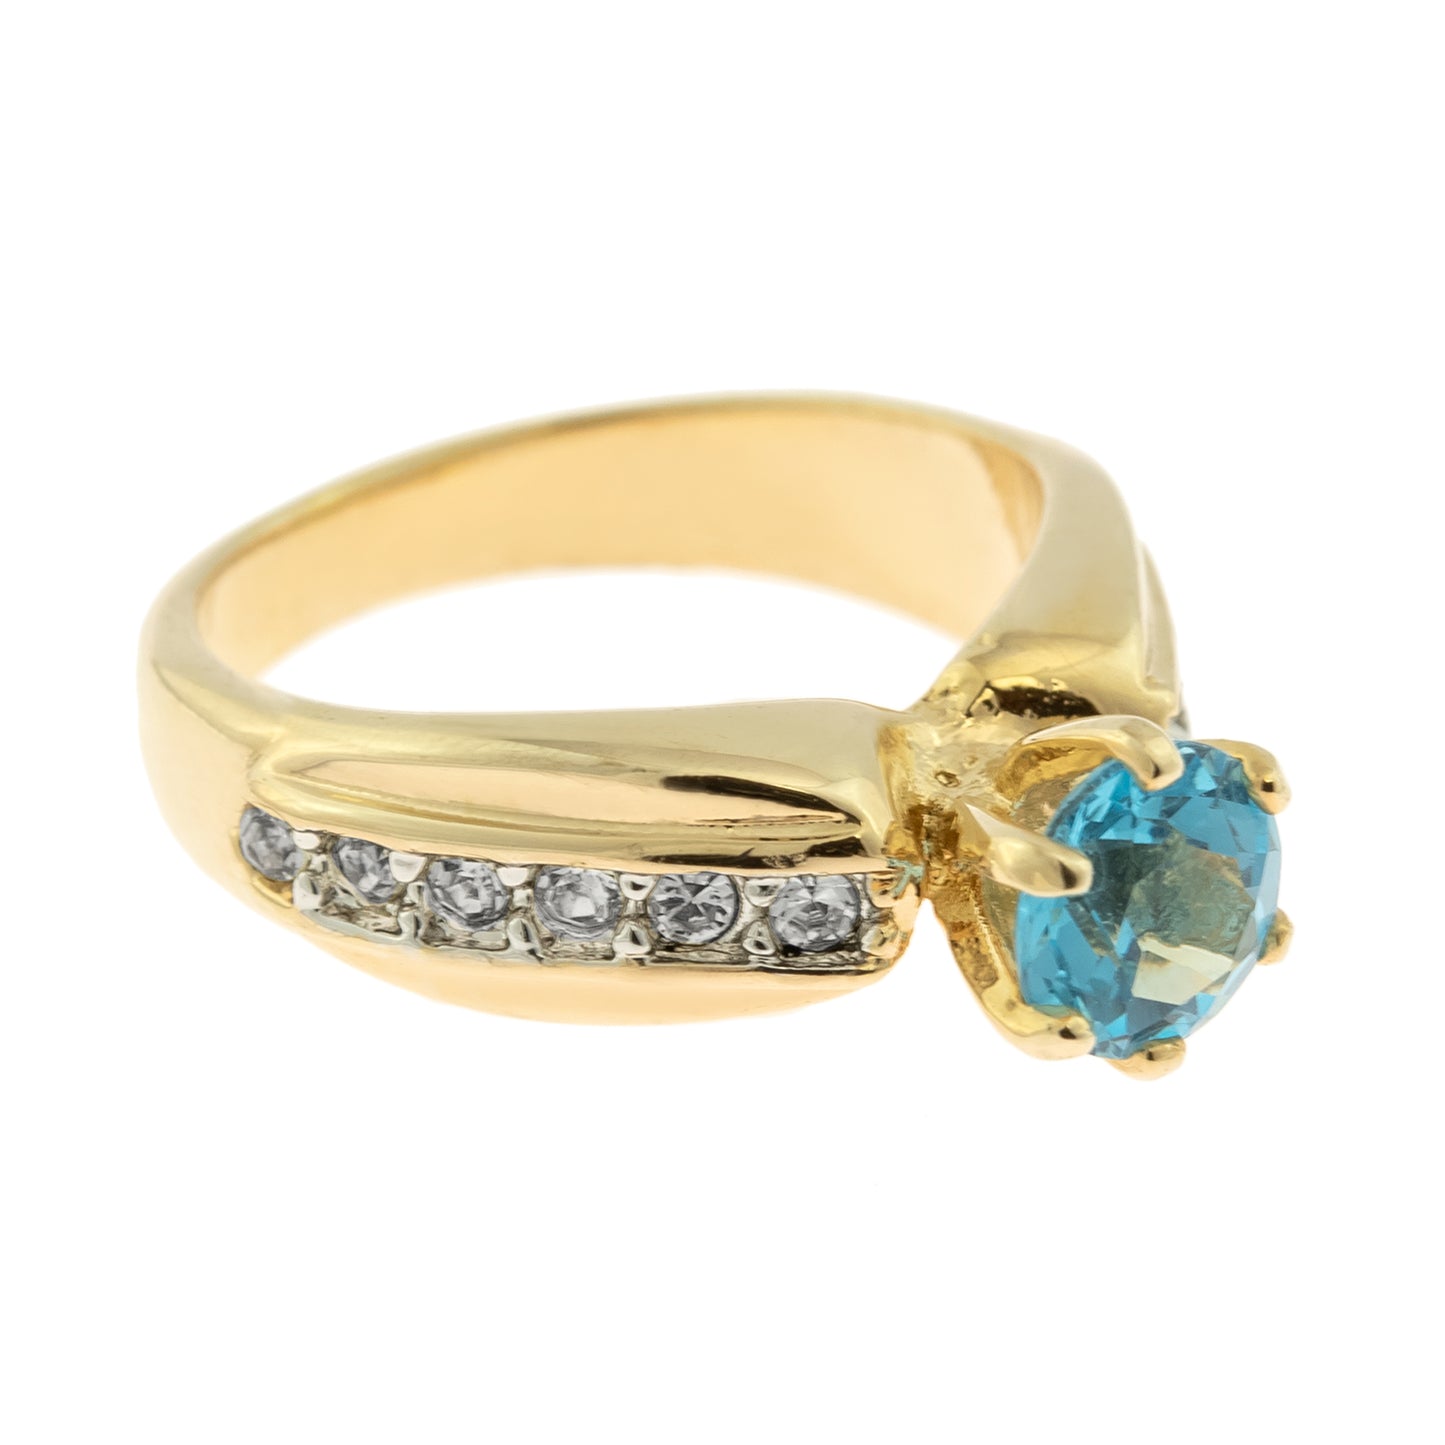 Vintage Ring Genuine Blue Topaz and Clear Austrian Crystals 18kt Yellow Gold Plated Made in USA Size: 6